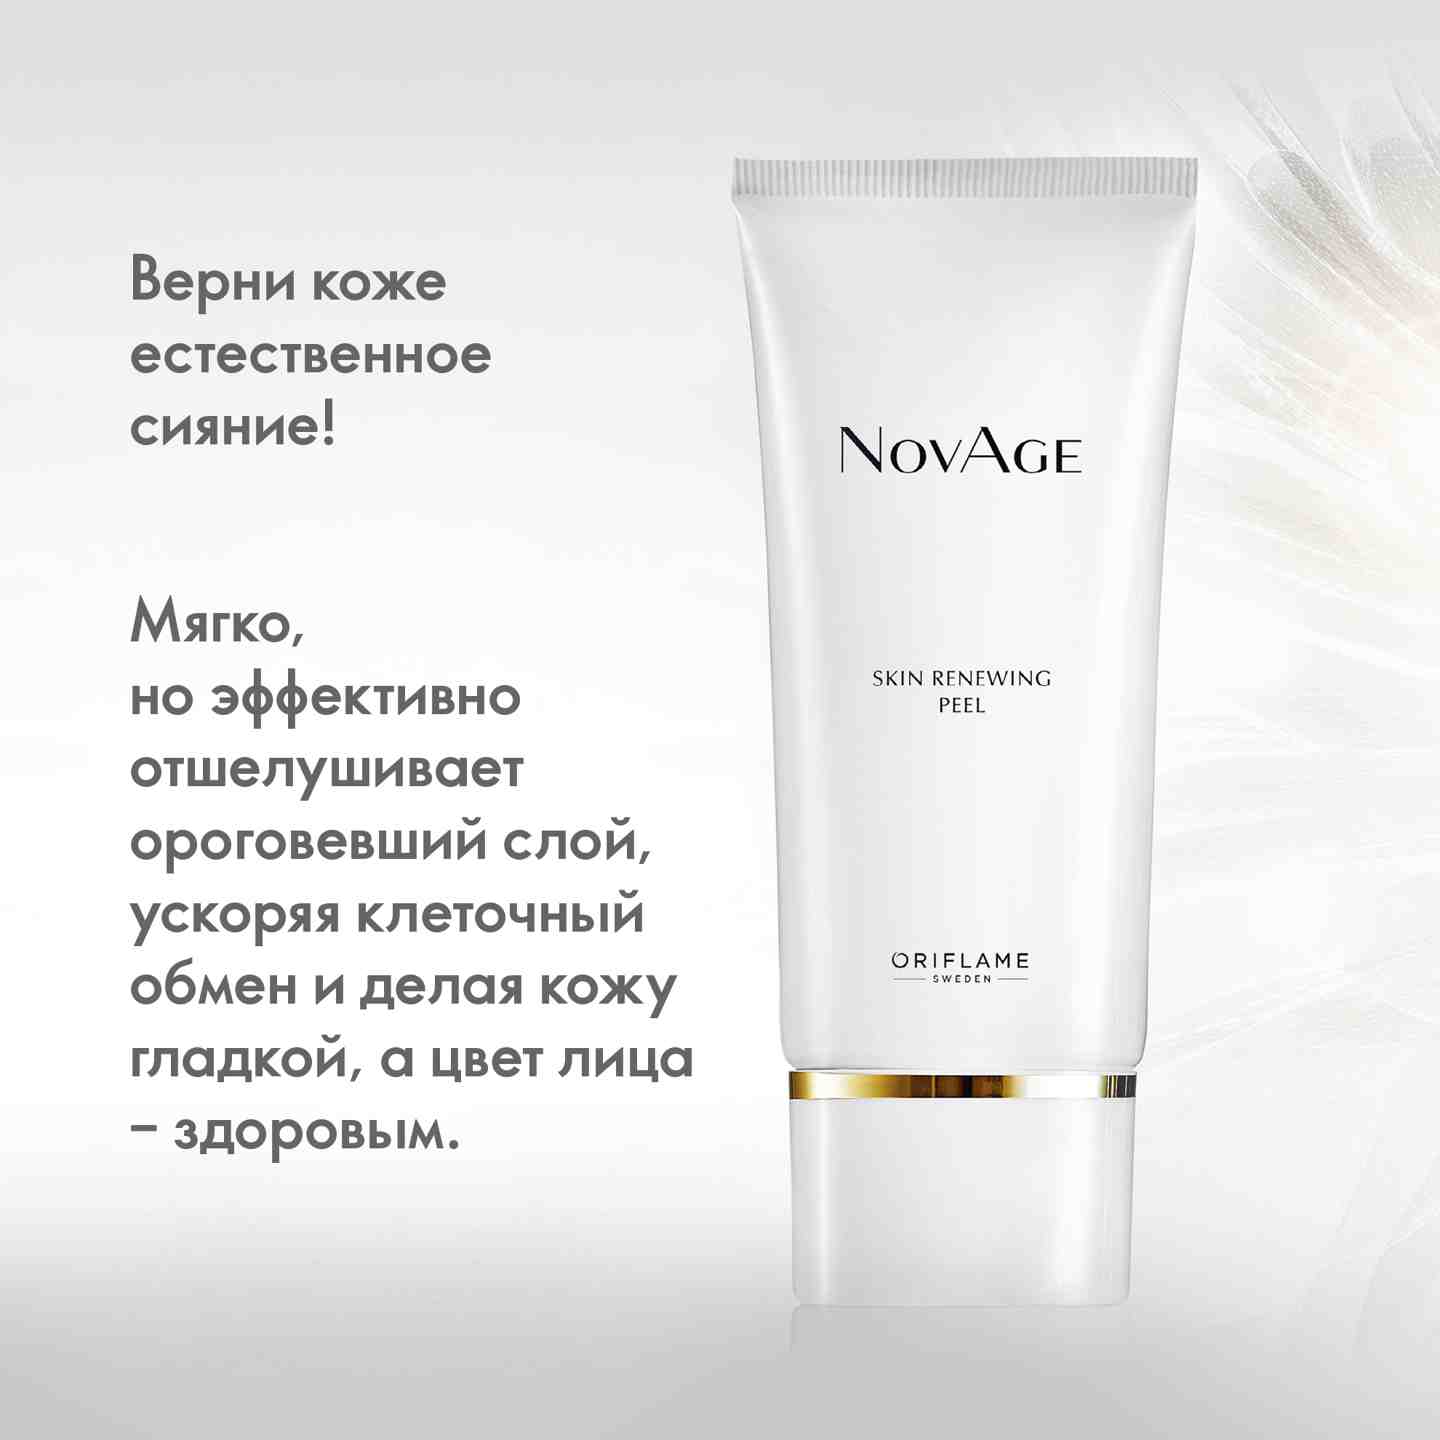 https://media-cdn.oriflame.com/productImage?externalMediaId=product-management-media%2fProducts%2f33988%2fRU%2f33988_4.png&id=14480078&version=1